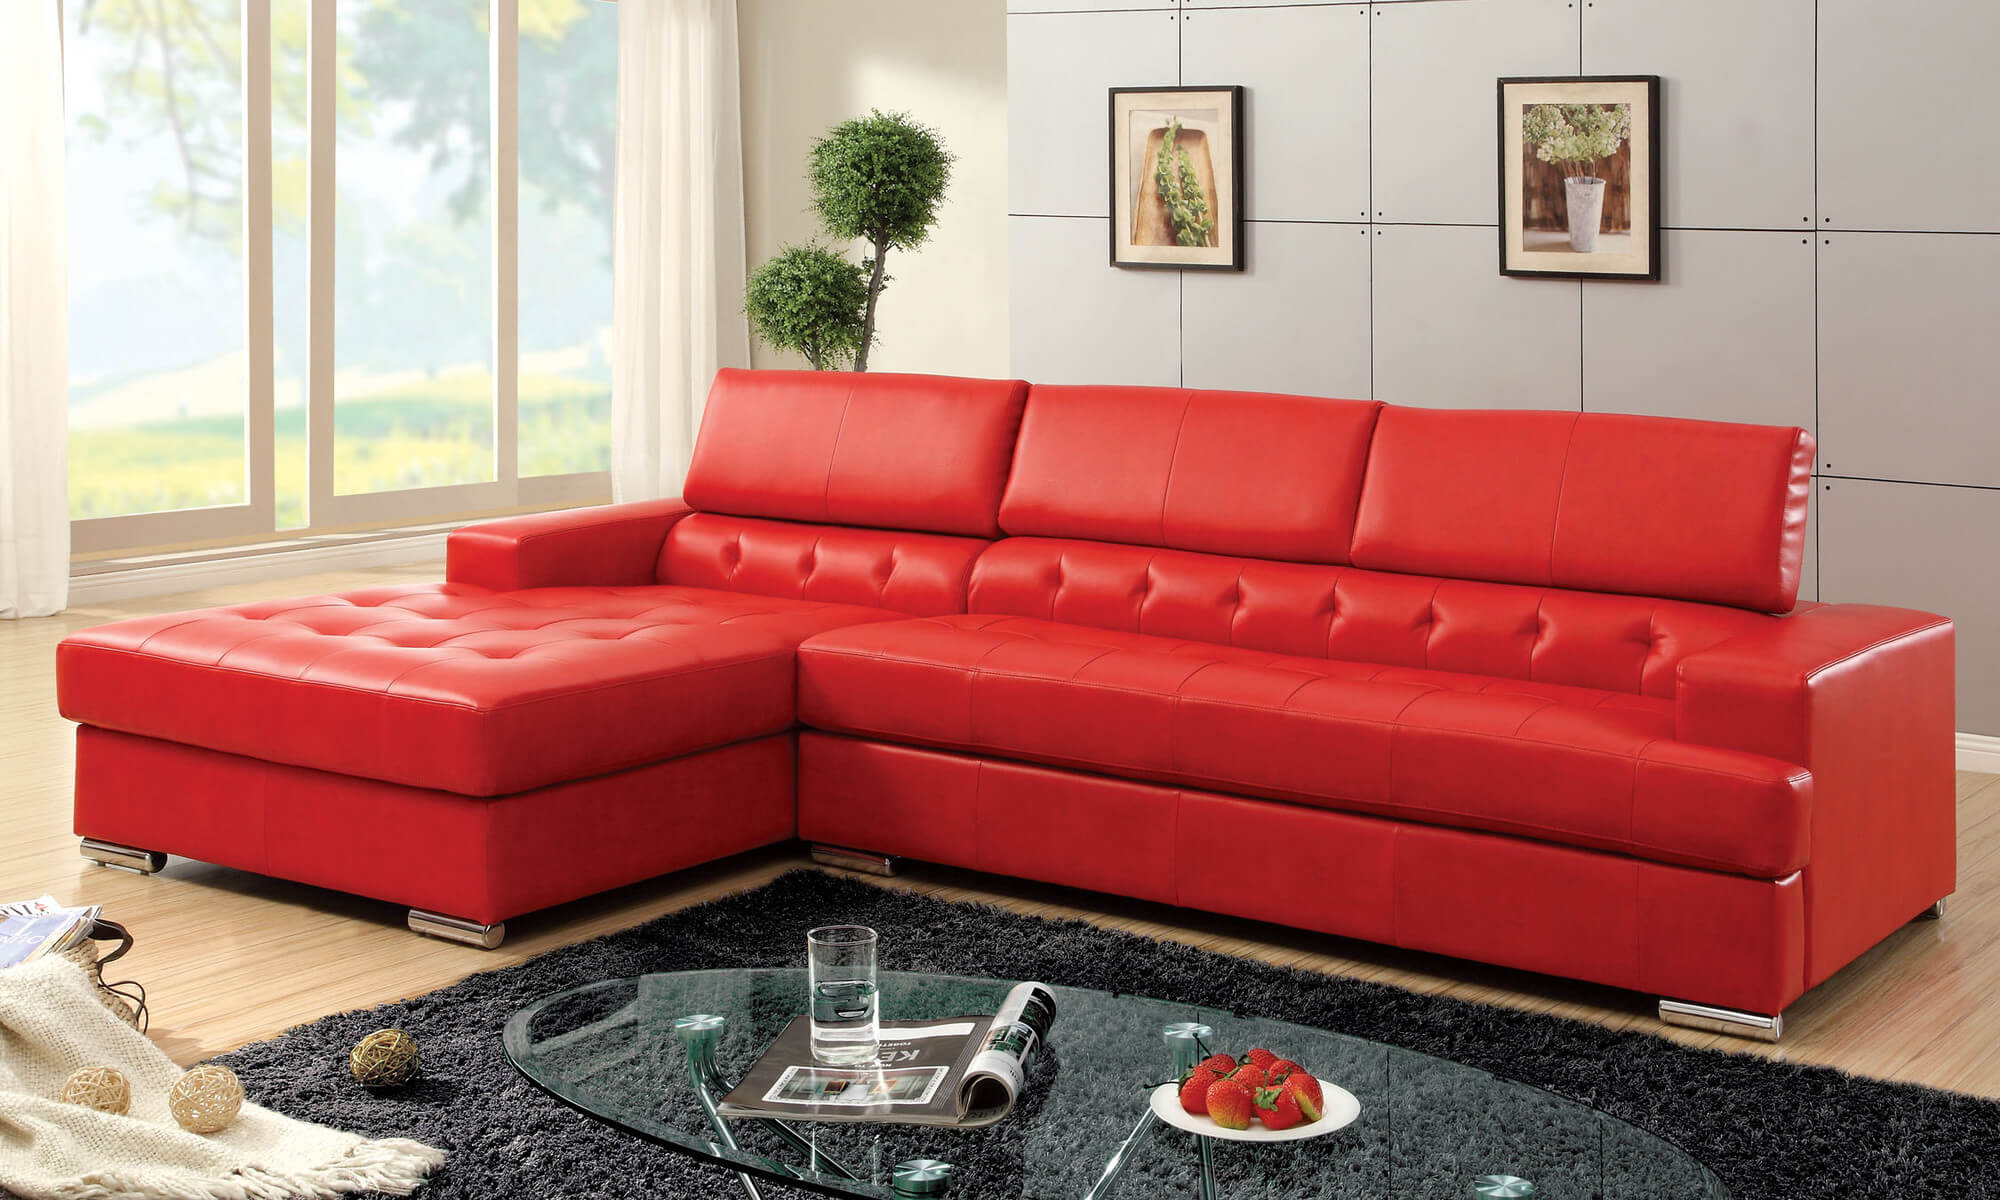 Pictures of Hokku Designs Red Leather Sectional with Partially Tufted Upholstery red leather sectional sofa